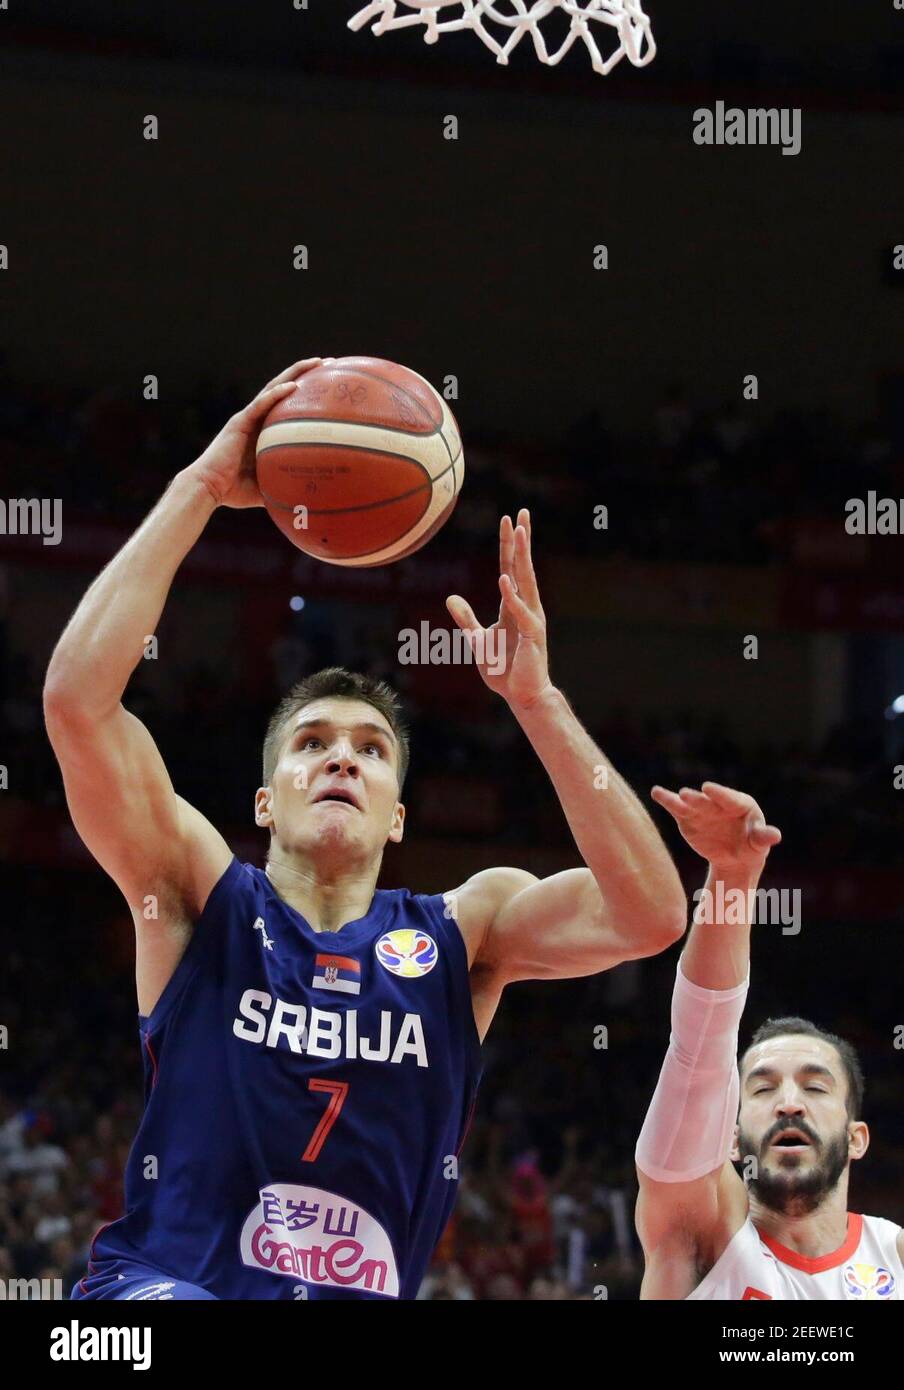 Basketball - FIBA World Cup - Second Round - Group J - Spain v Serbia - Wuhan Sports Centre, Wuhan, China - September 8, 2019 Serbia's Bogdan Bogdanovic in action with Spain's Pau Ribas REUTERS/Jason Lee Stock Photo